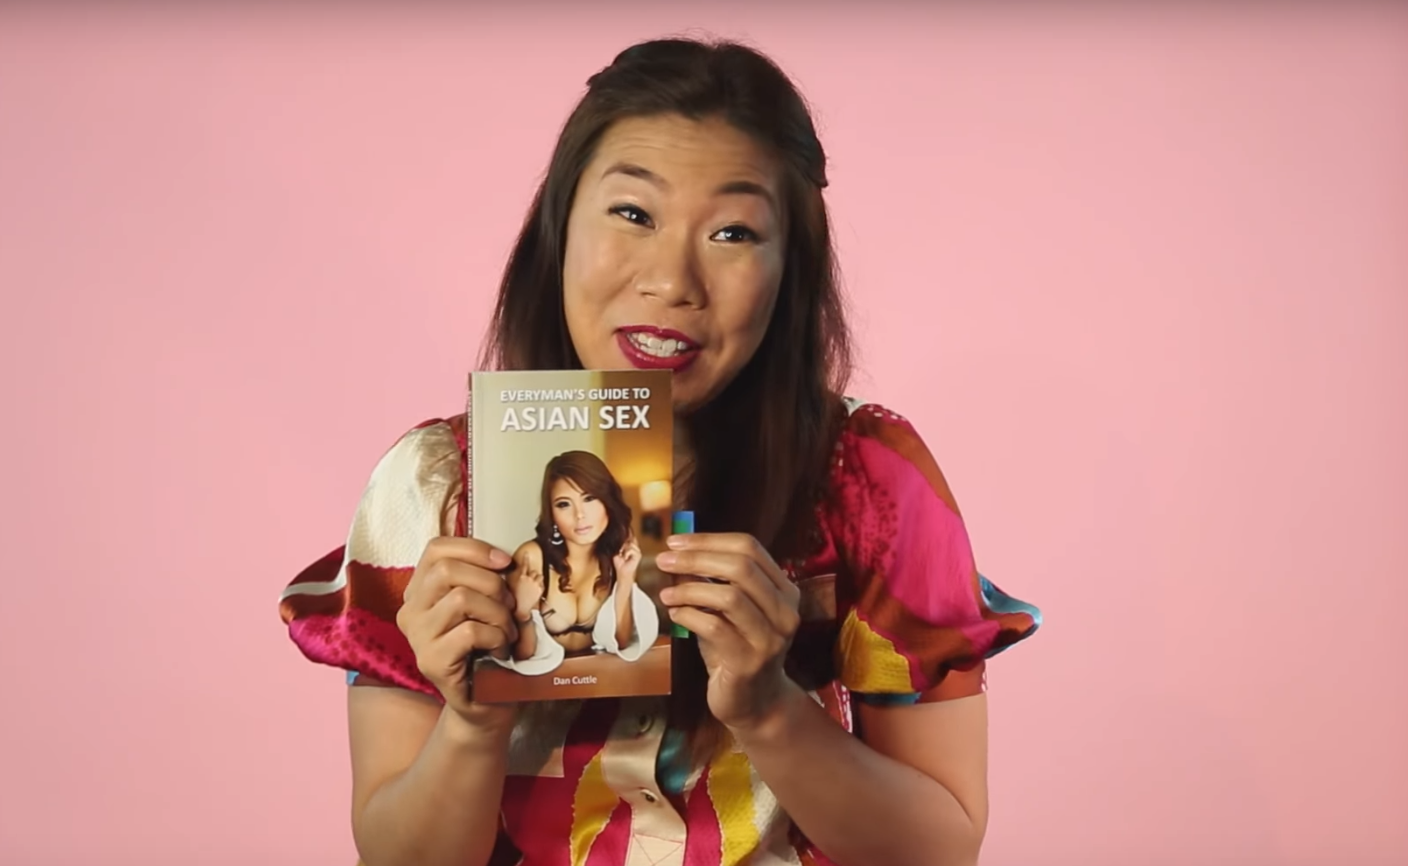 Asian woman hilariously mocks men who write How to pick up Asian women books The Independent The Independent